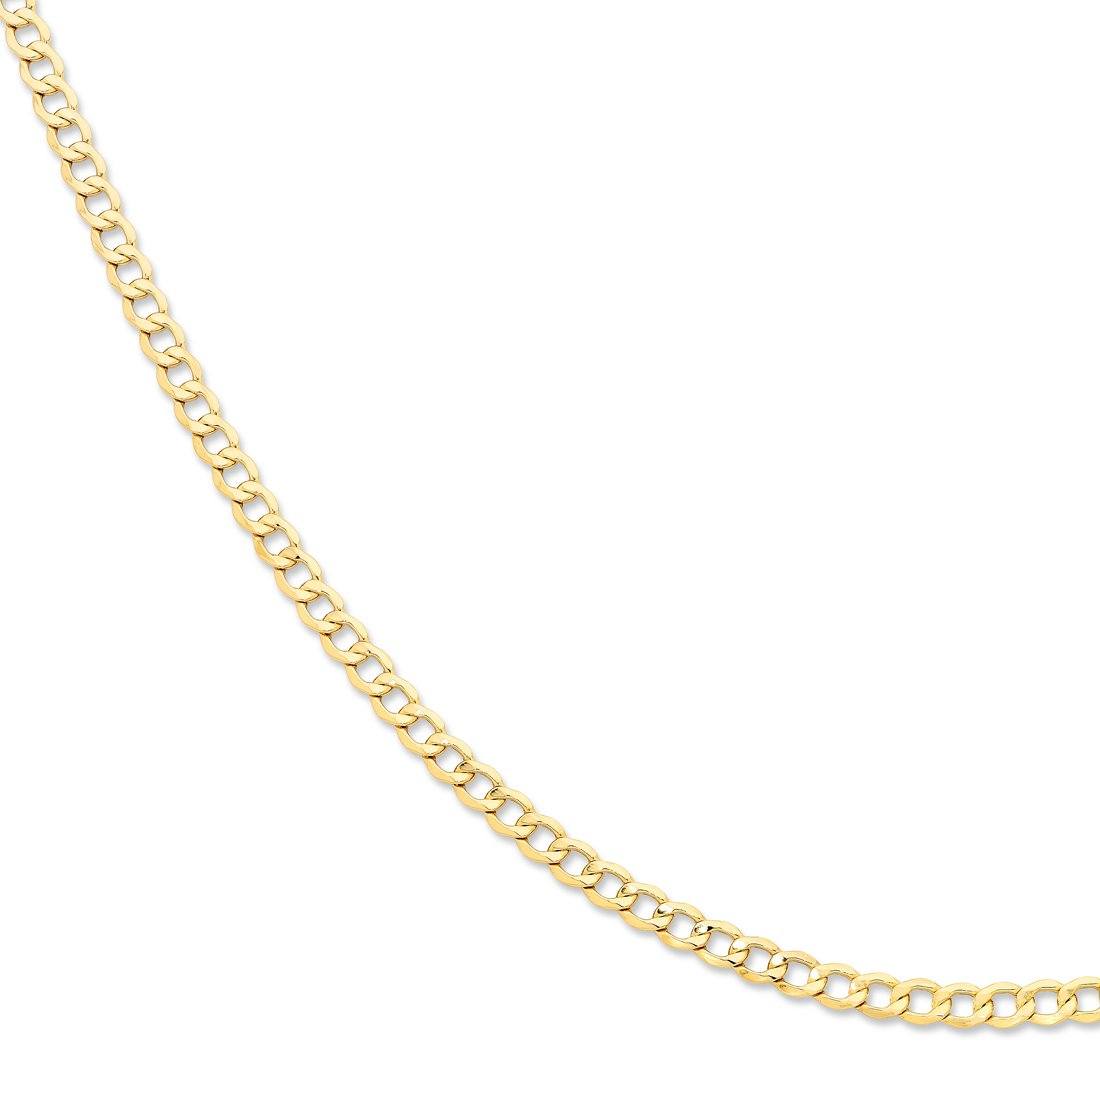 Bevilles 9ct Yellow Gold Silver Infused Curb Chain Necklace 50cm